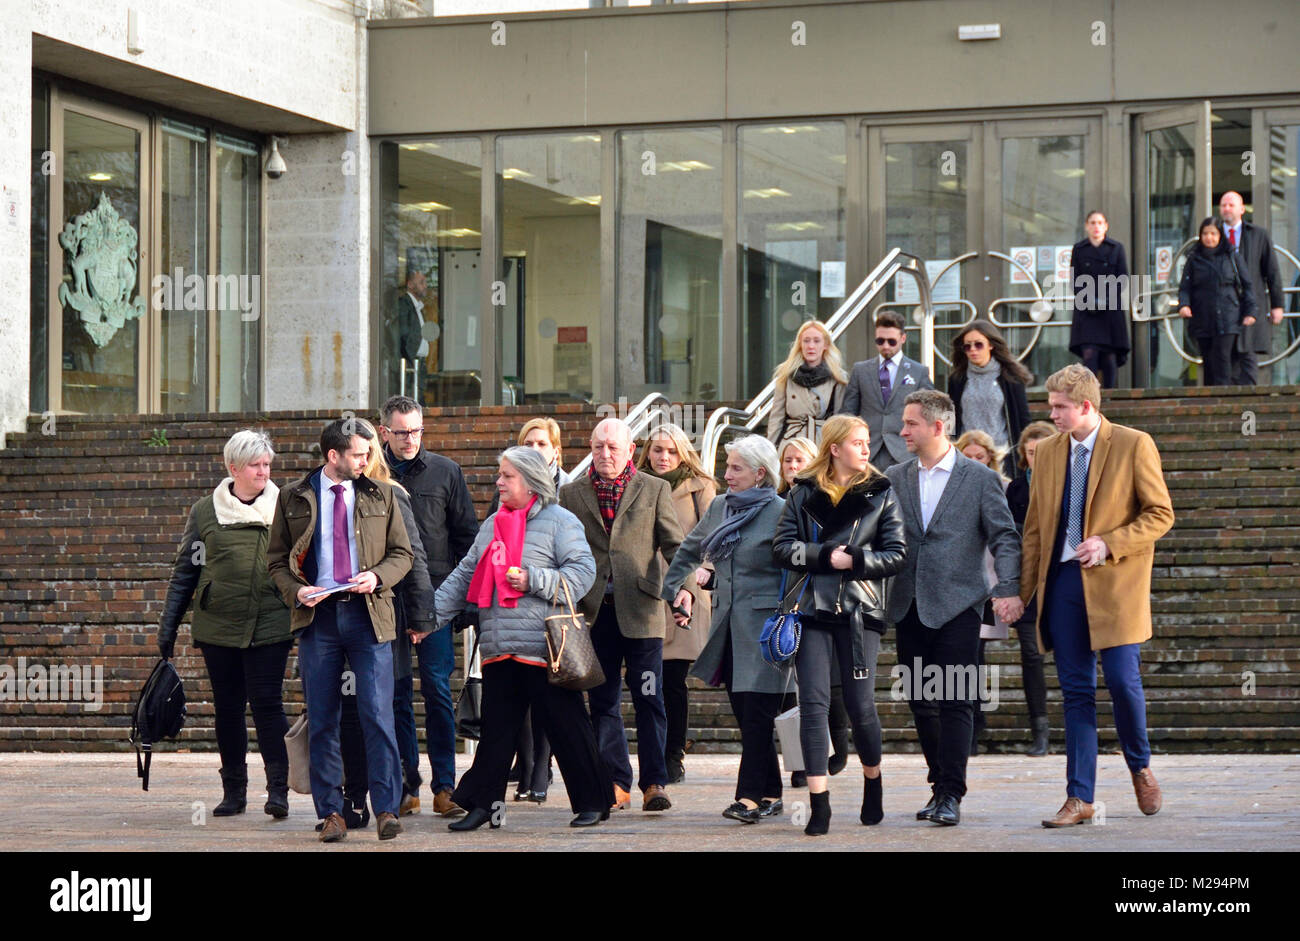 Maidstone, UK. 6th Feb. The family of 23 year old Molly McLaren leave Maidstone Crown Court and make a statement after seeing her ex-boyfriend Joshua Stimson (26) sentenced to life in prison with a minimum of 26 years for her murder in Chatham in June 2017. Credit: PjrFoto/Alamy Live News Stock Photo